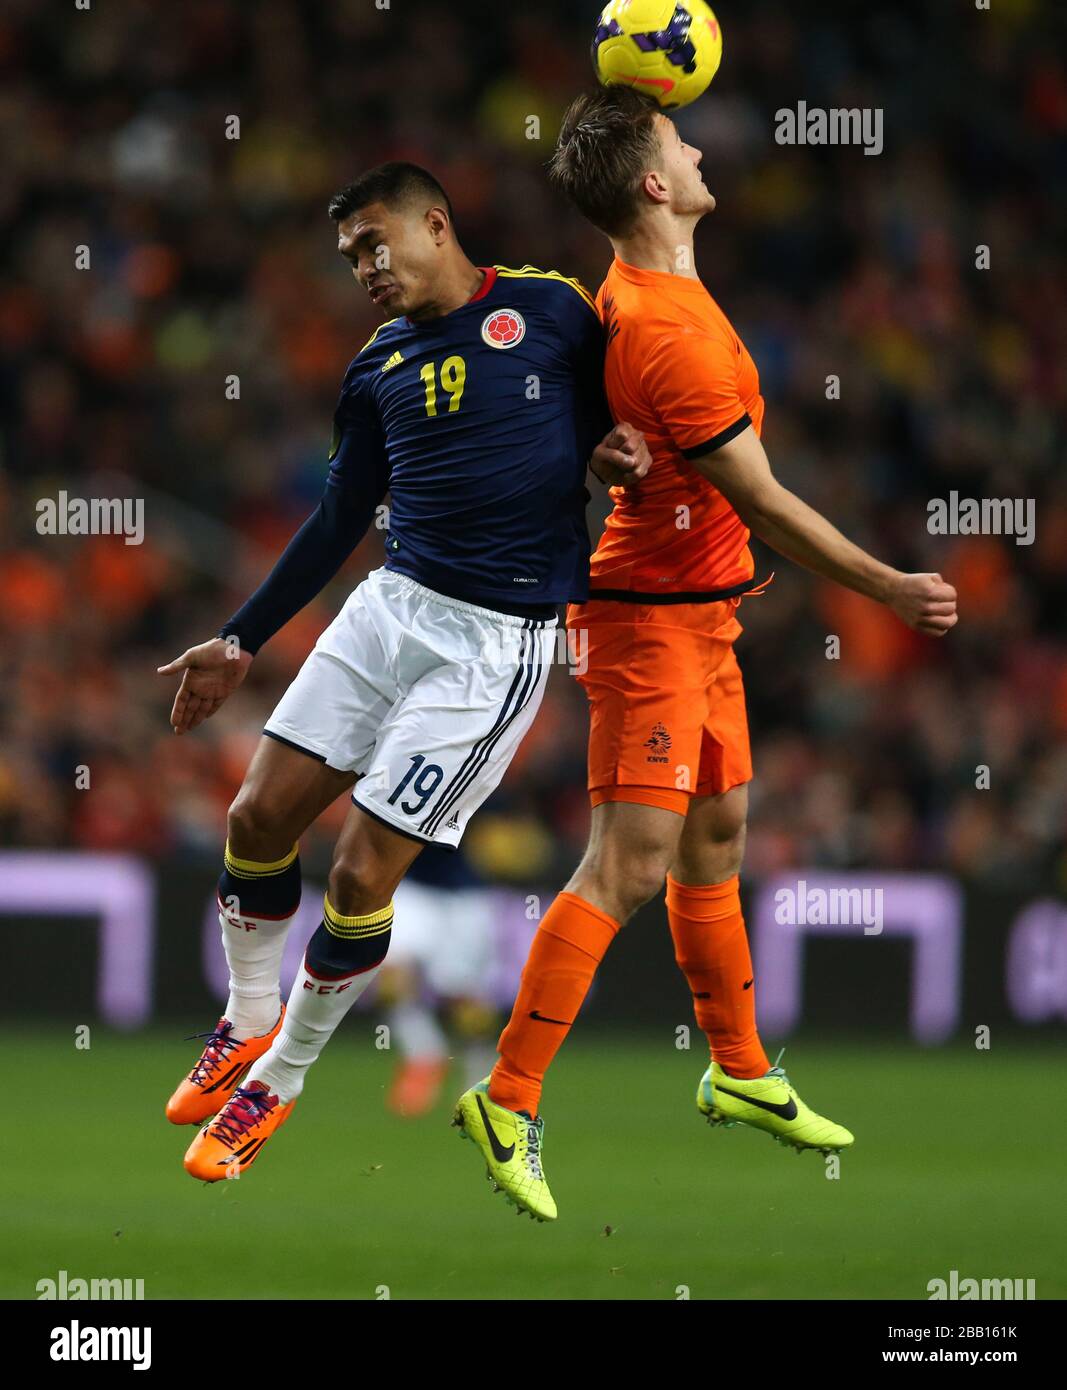 Netherlands' Joel Veltman (right) and Colombia's Teofilo Gutierrez battle for the ball in the air Stock Photo